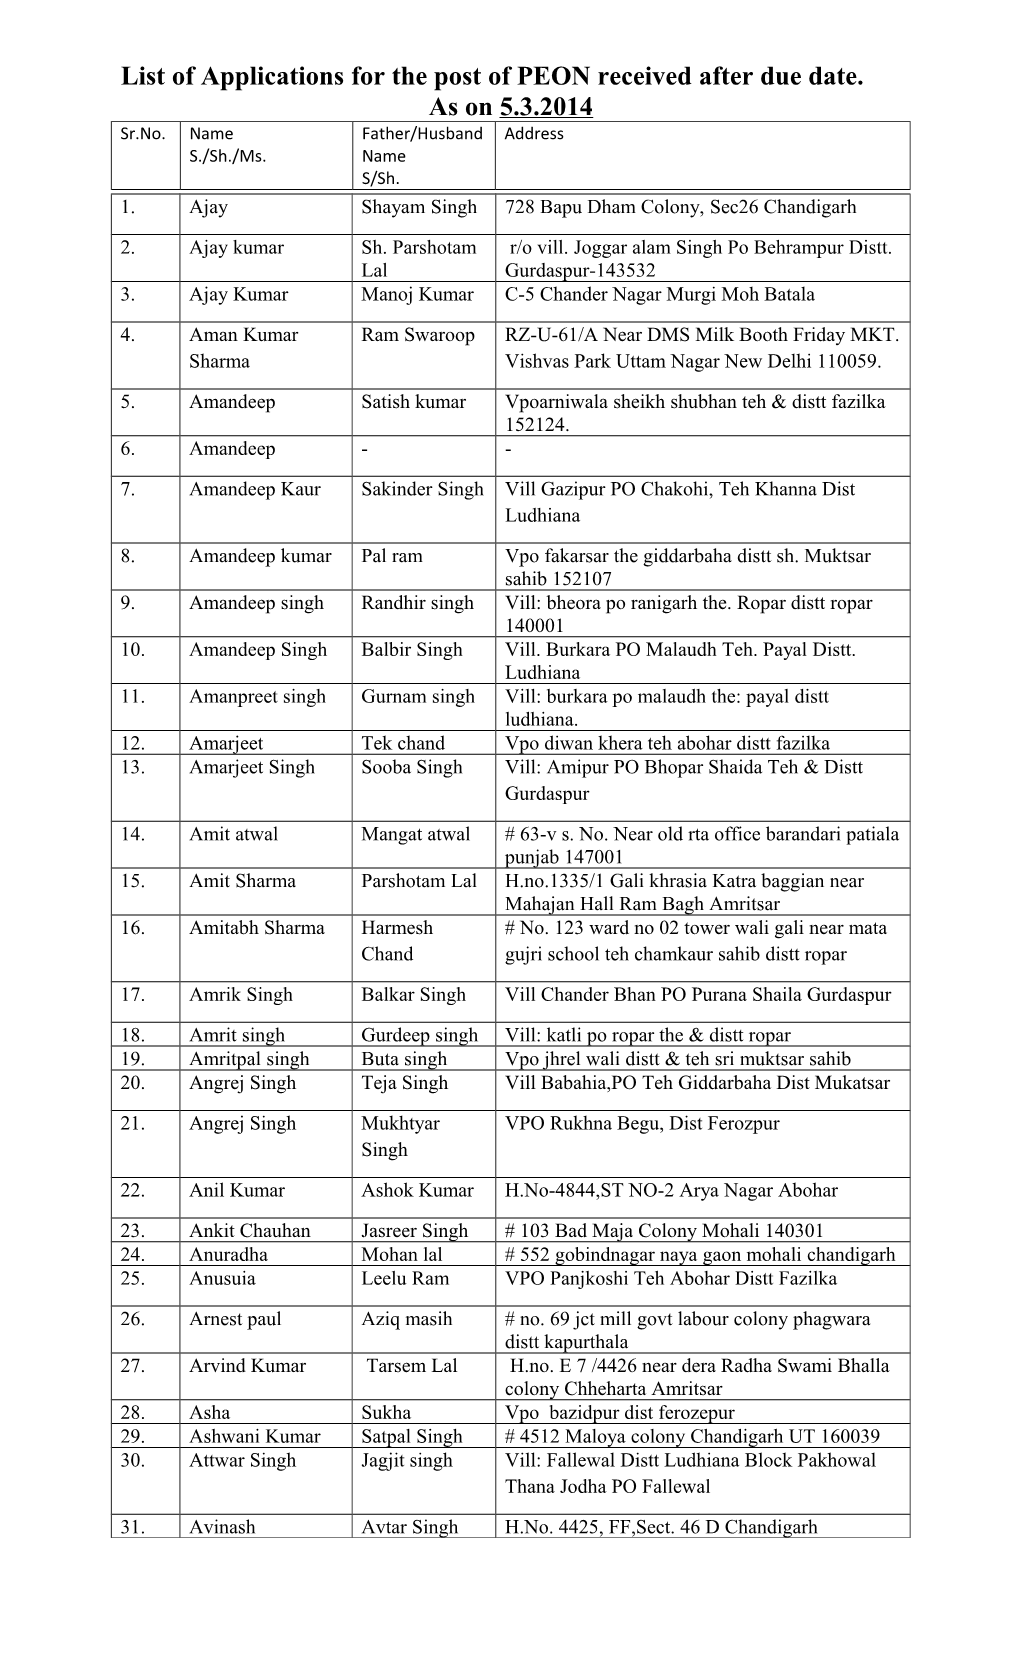 List of Applications for the Post of PEON Received After Due Date. As on 5.3.2014 Sr.No